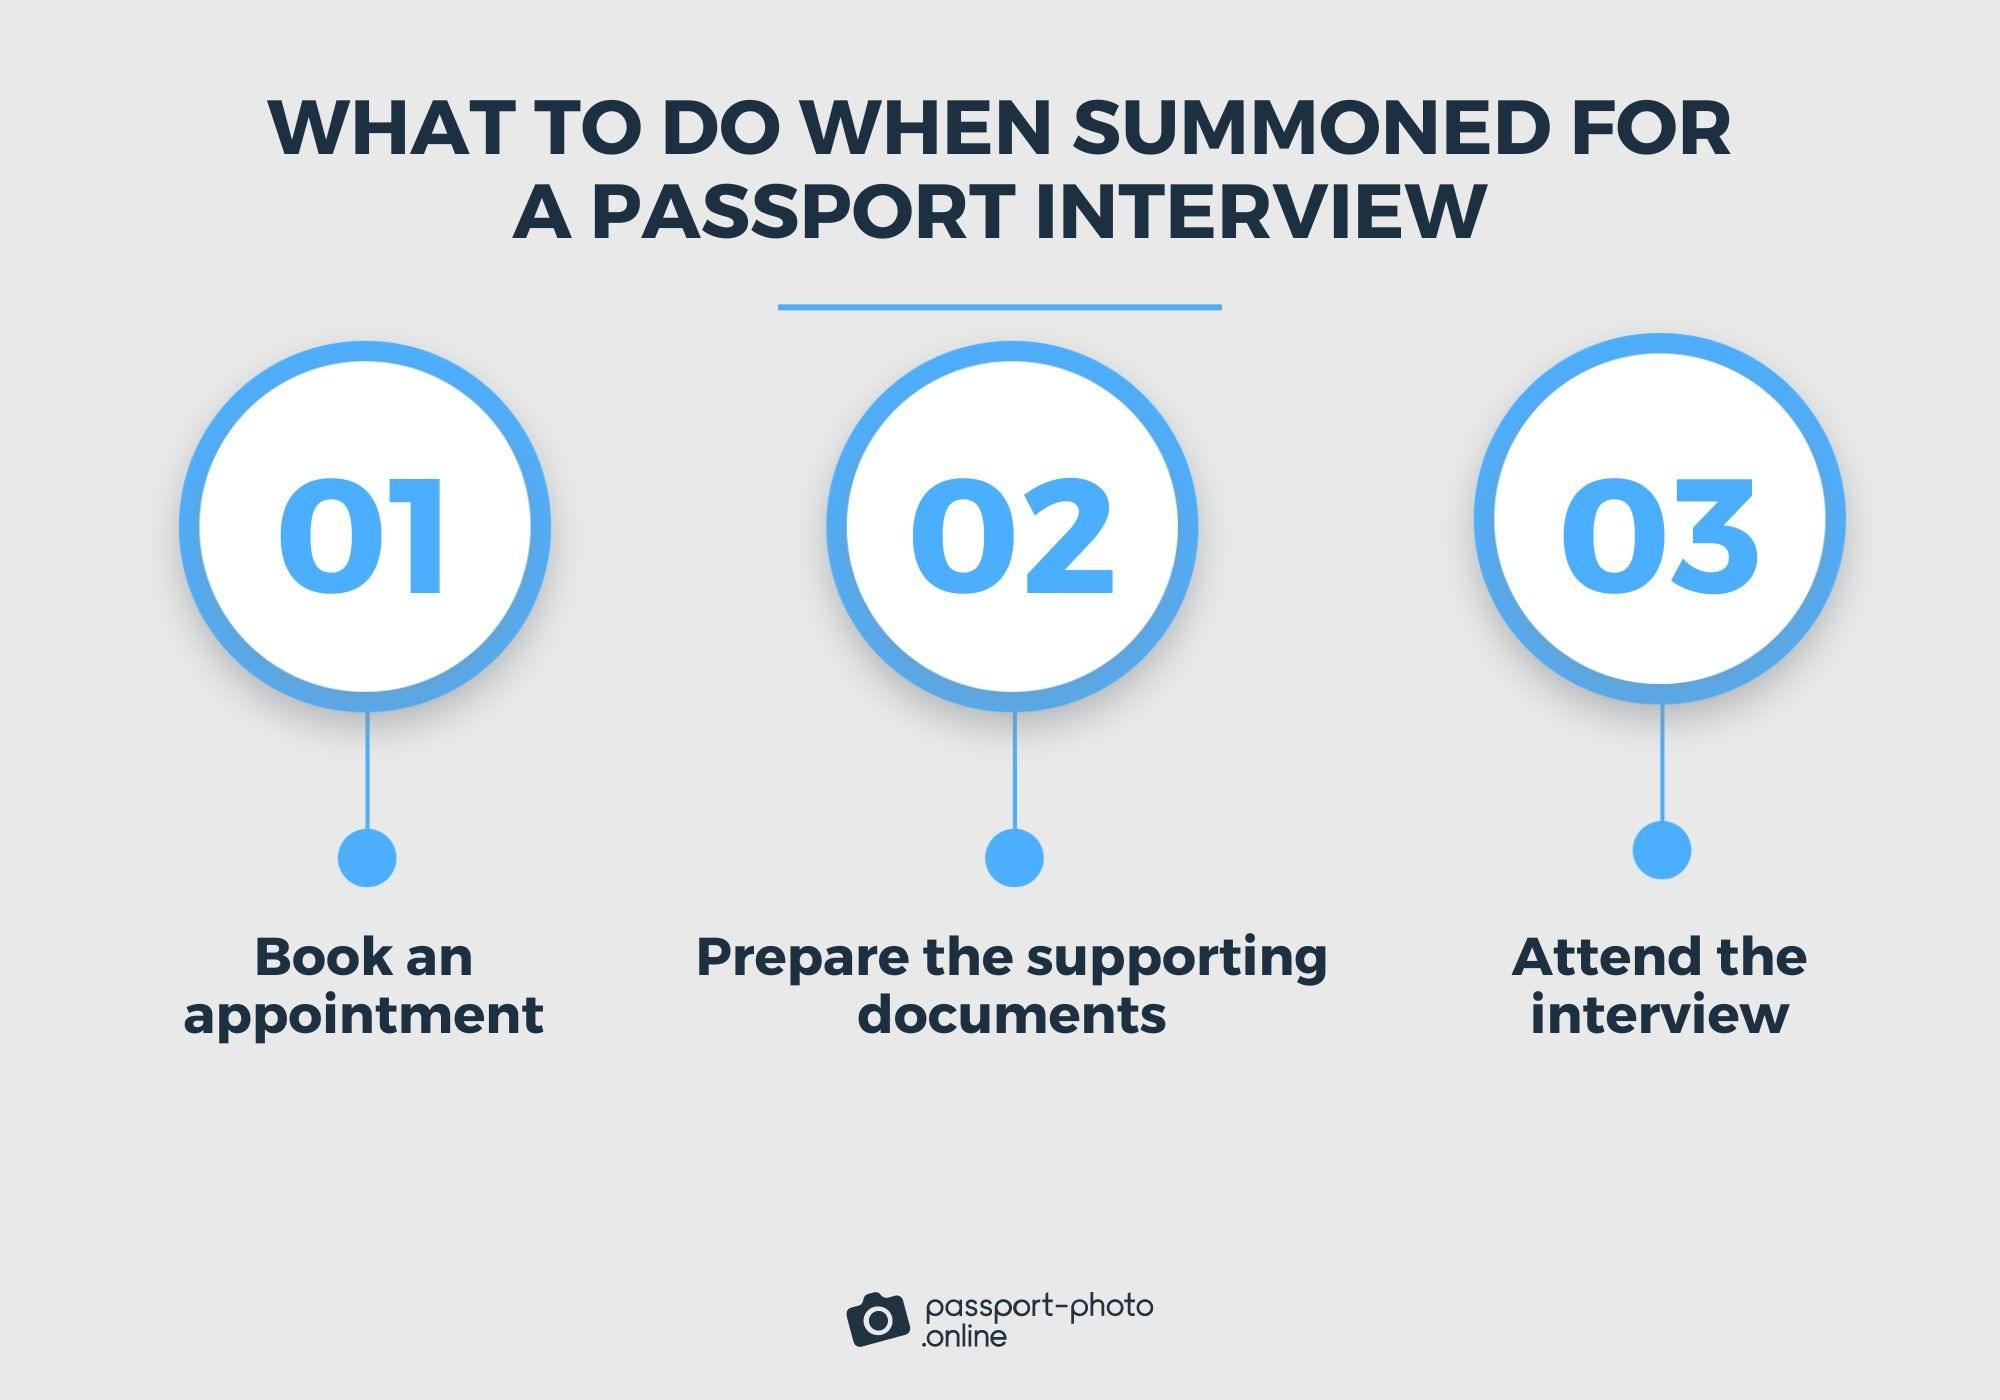 an image that shows the steps to follow for a passport interview.